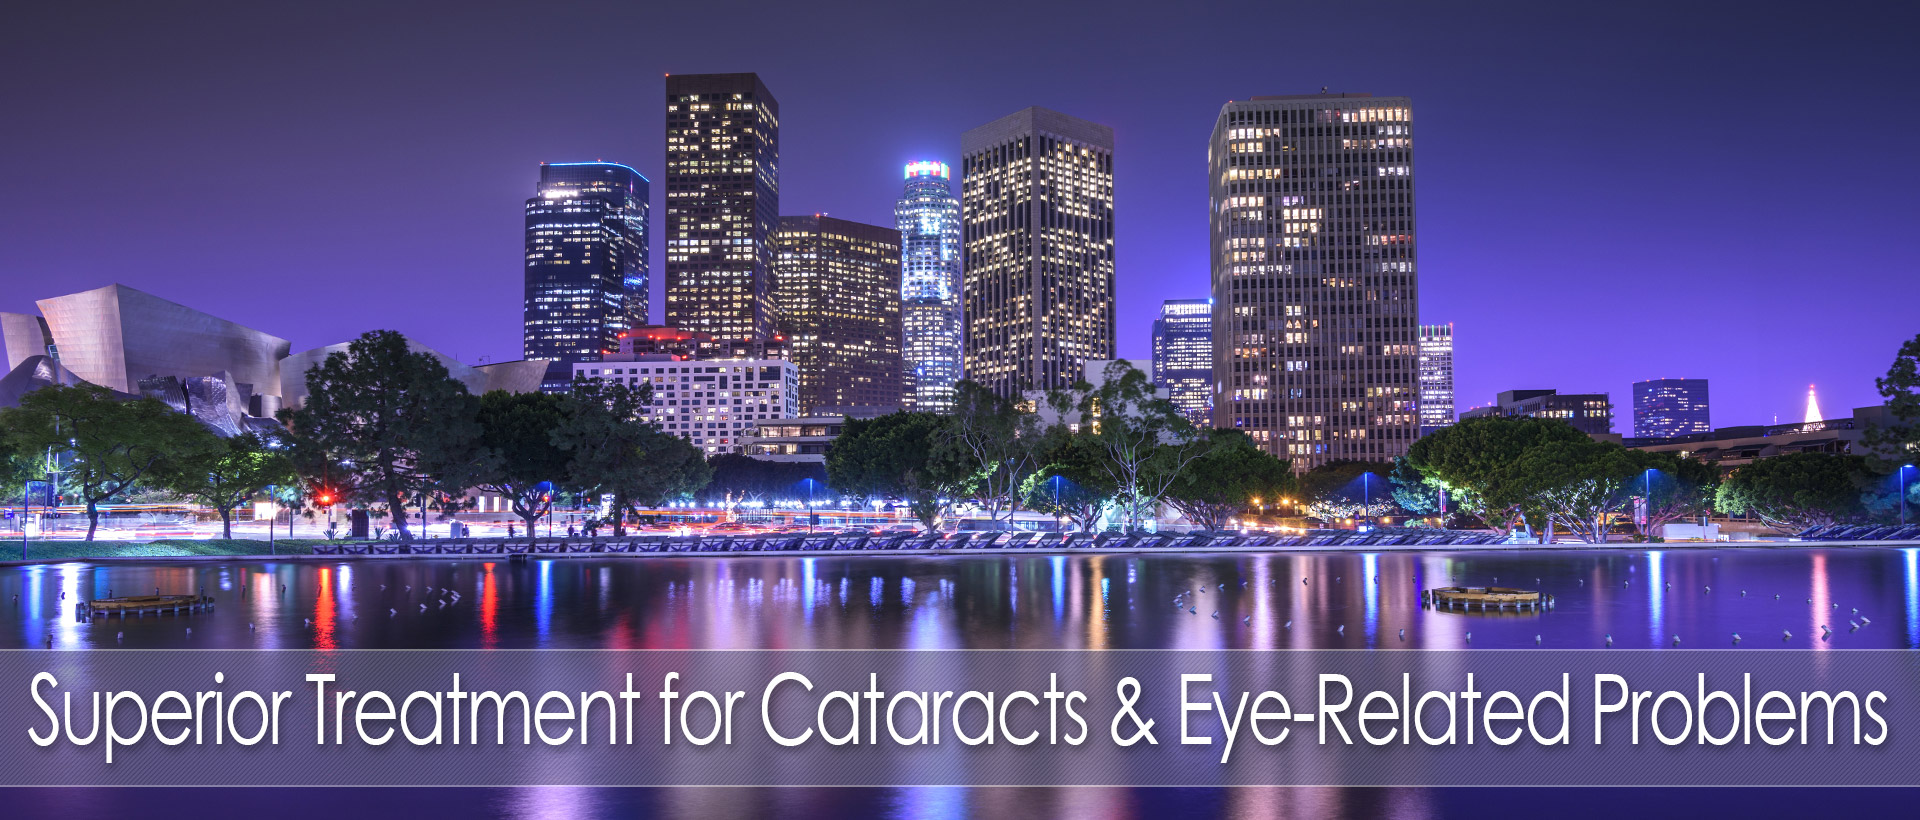 superior treatment for cataracts and eye related problems los angeles ca